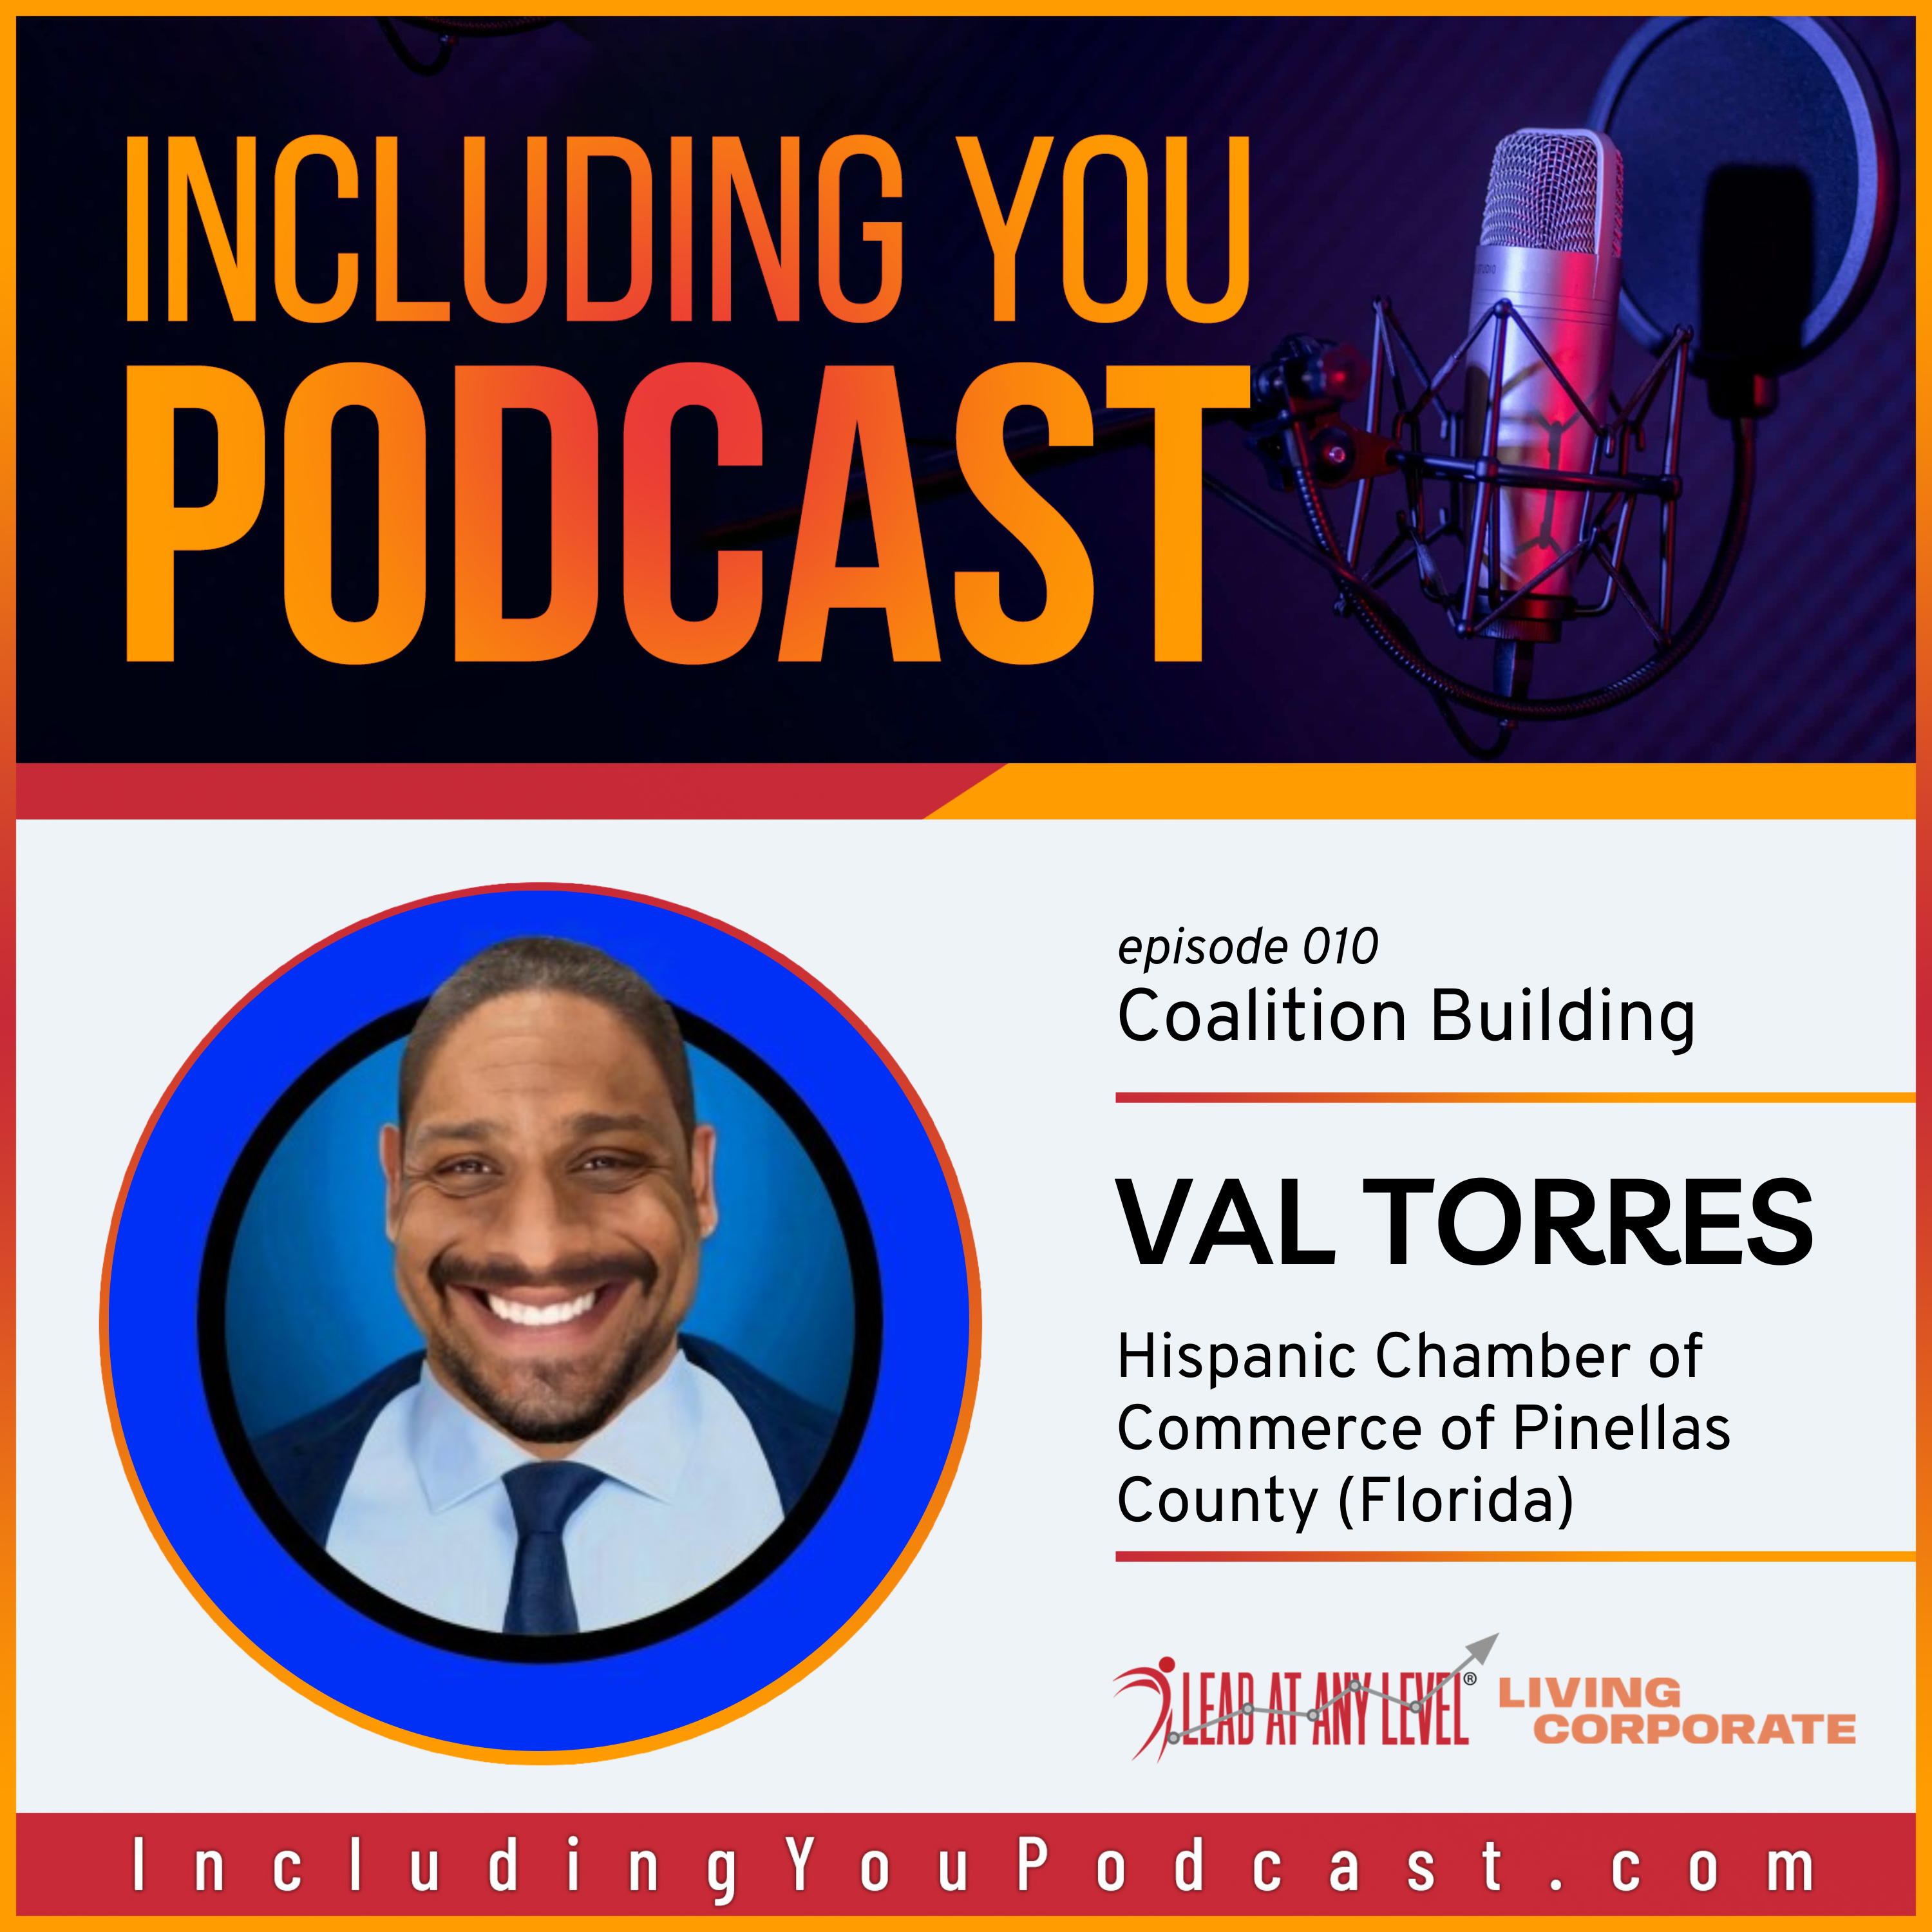 Coalition Building with Dr. Val Torres (Including You Podcast)